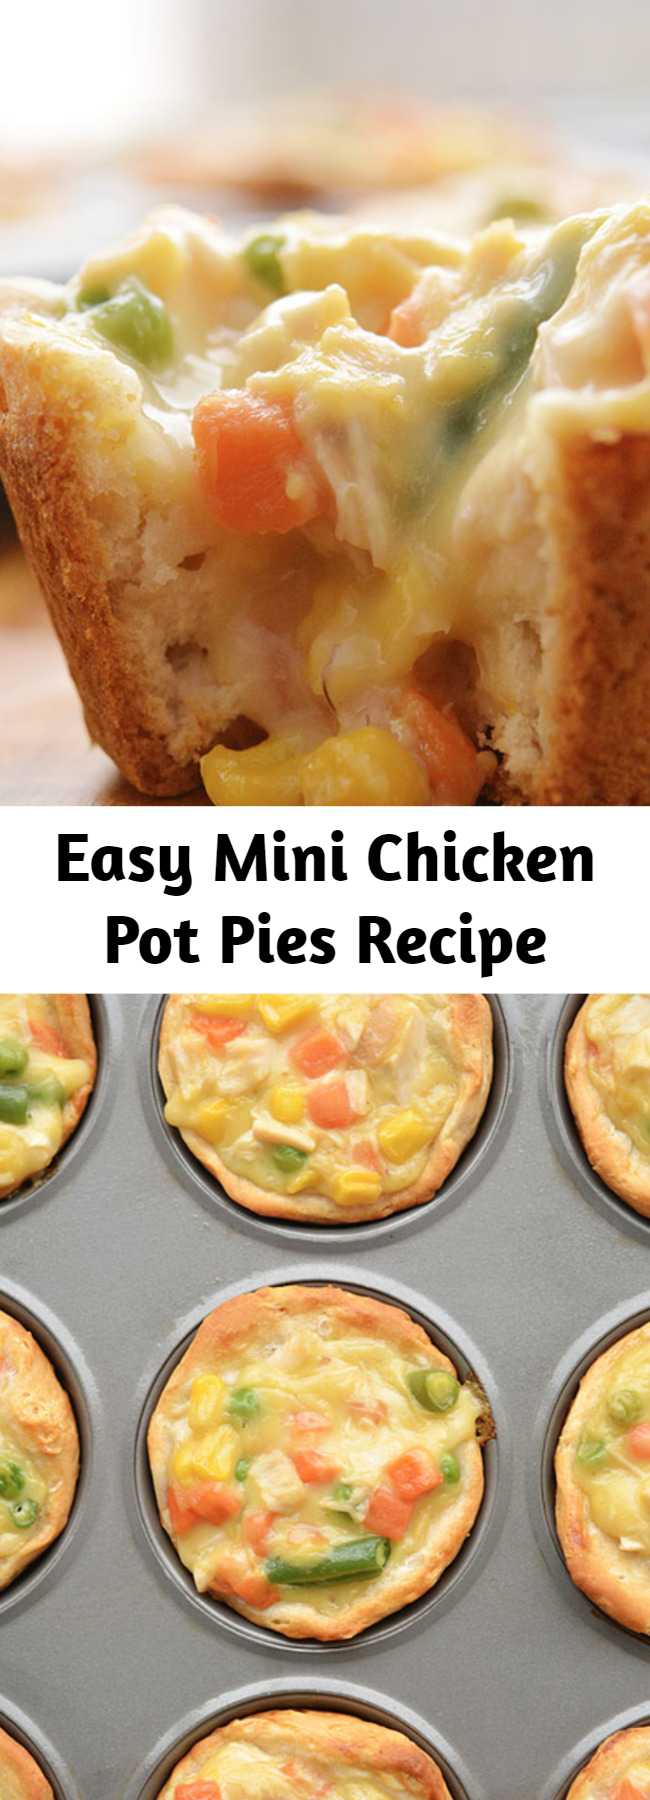 Easy Mini Chicken Pot Pies Recipe - These mini chicken pot pies are ridiculously easy. Seriously… they only have 4 ingredients! And you can make them from start to finish in about 30 minutes. Serve them with a little side salad and it makes a quick and simple weeknight dinner!